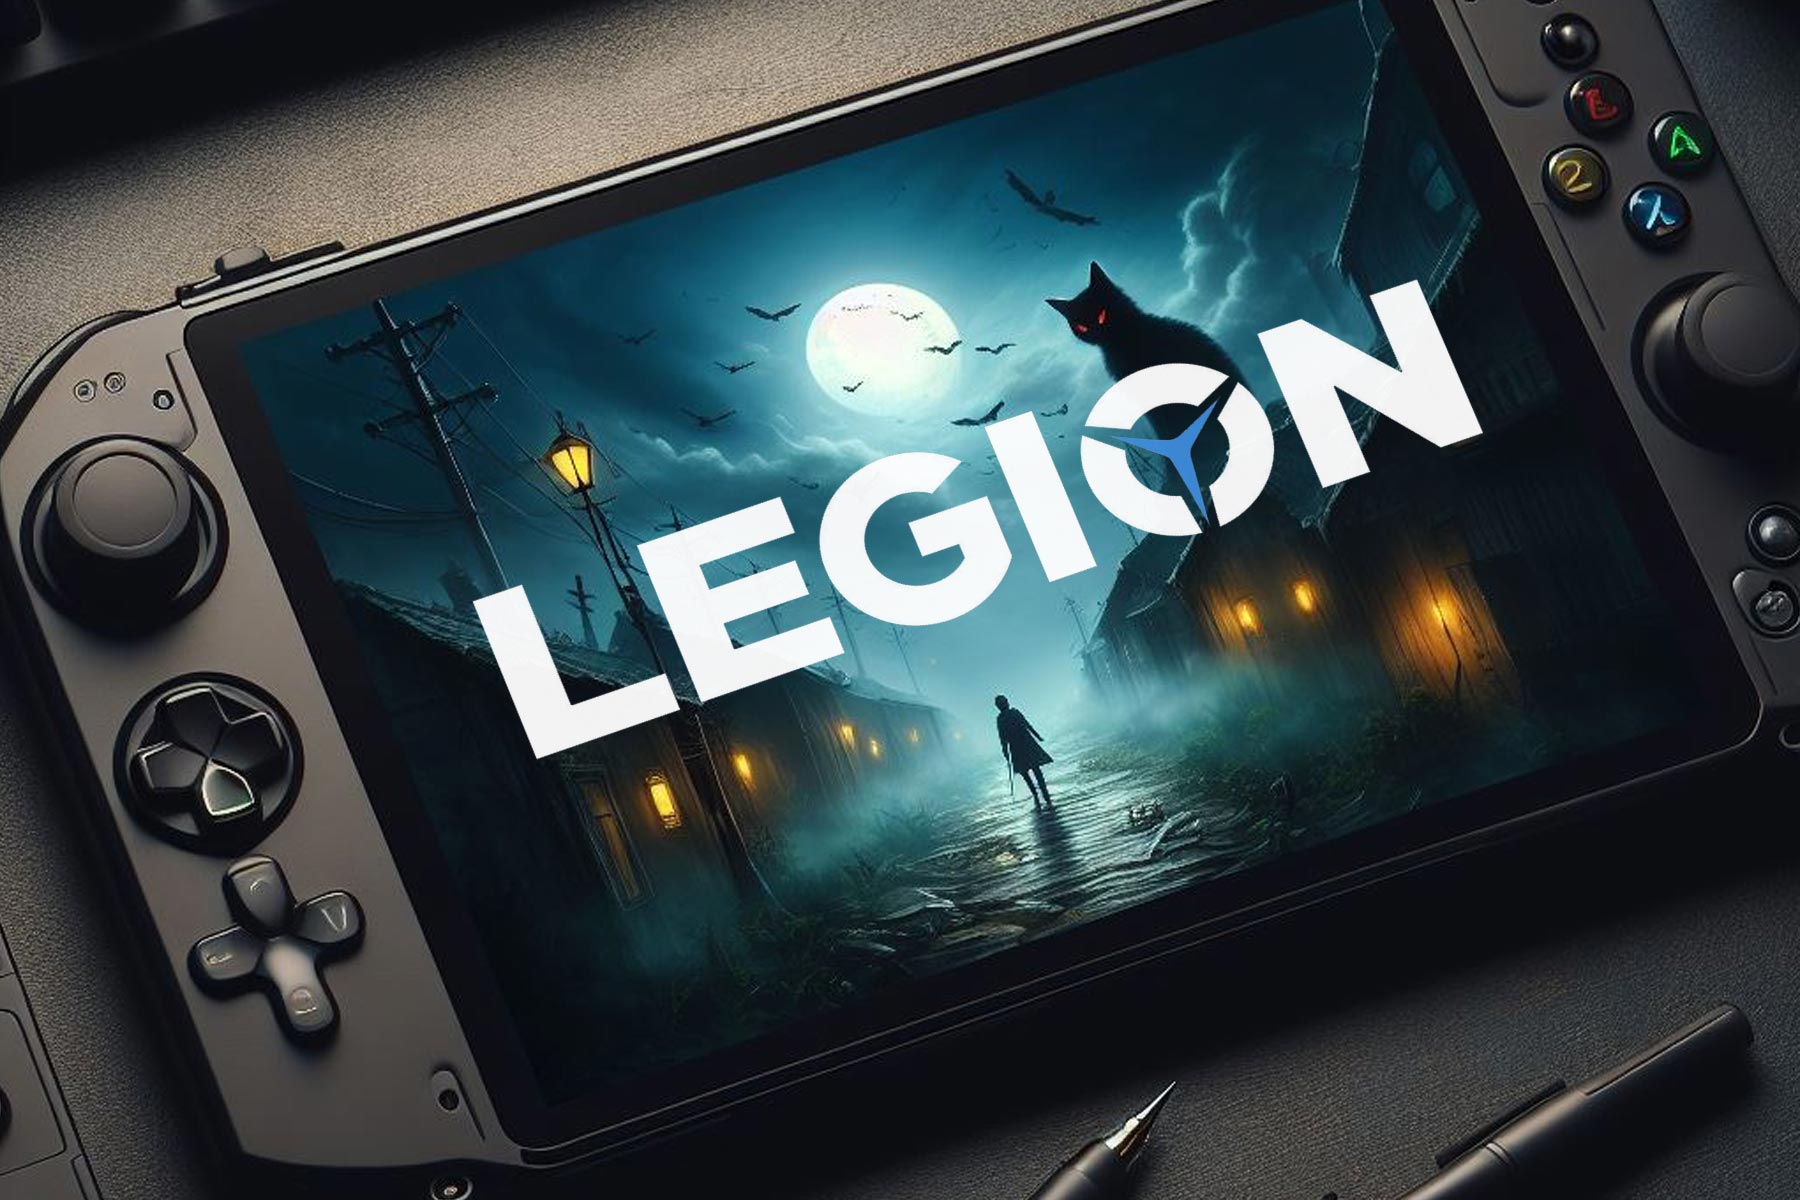 Is Legion Go’s successor coming? Speculations are rising after a manager interview